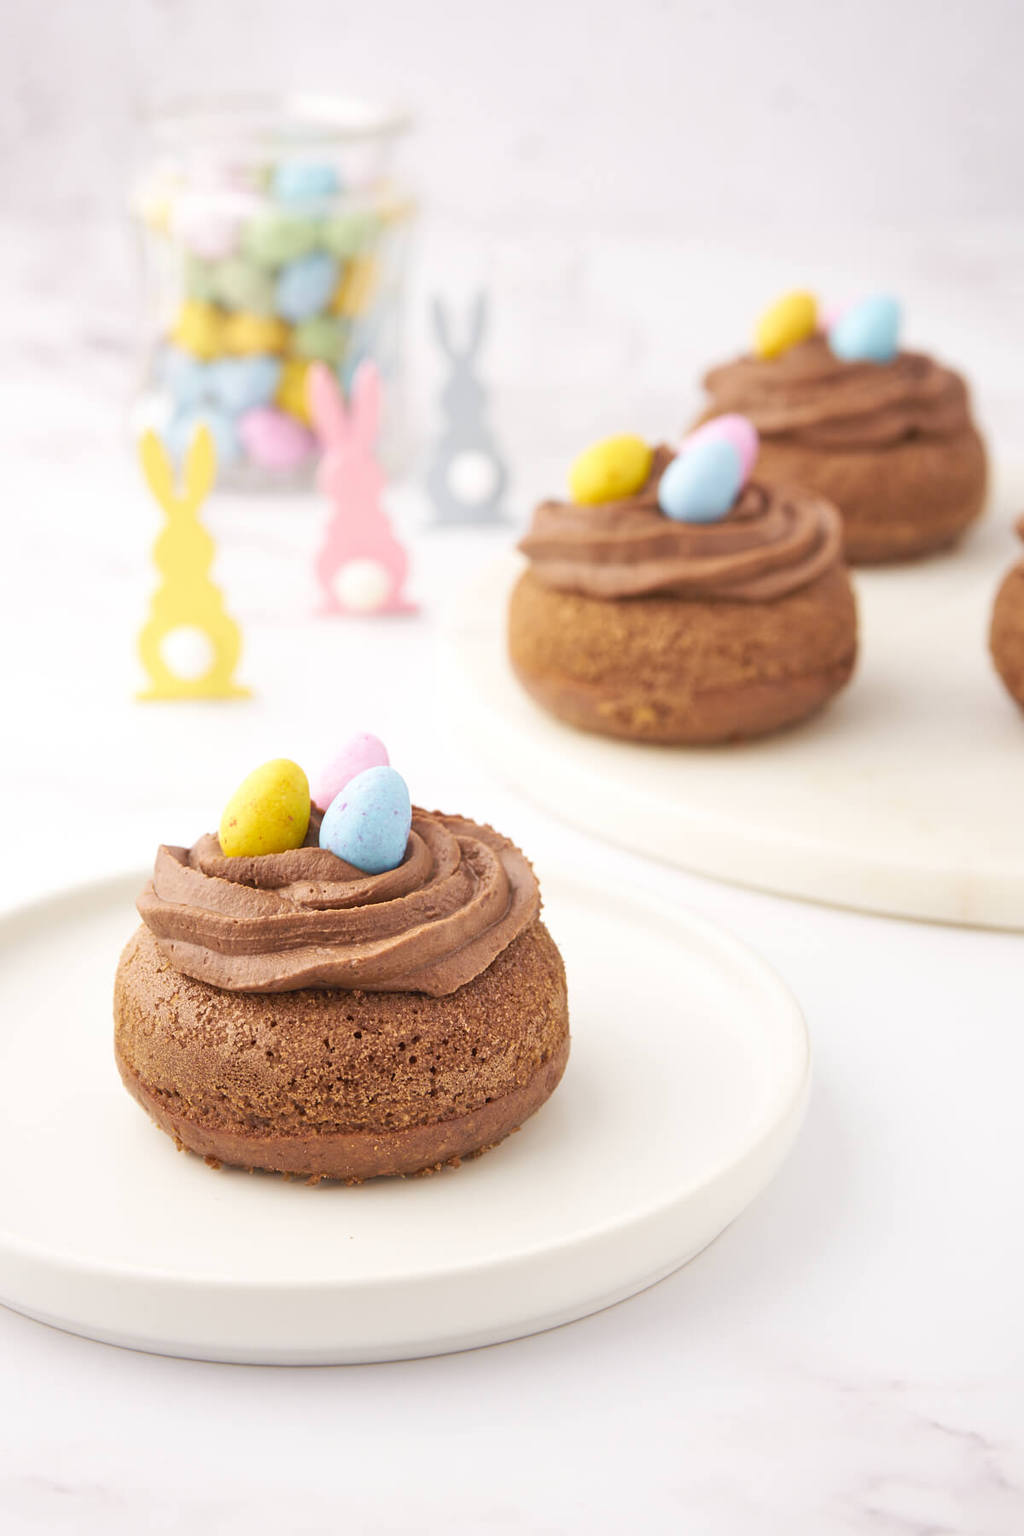 Chocolate baked donuts decorated as Easter Nests filled with Mini Eggs in an Easter table setting.